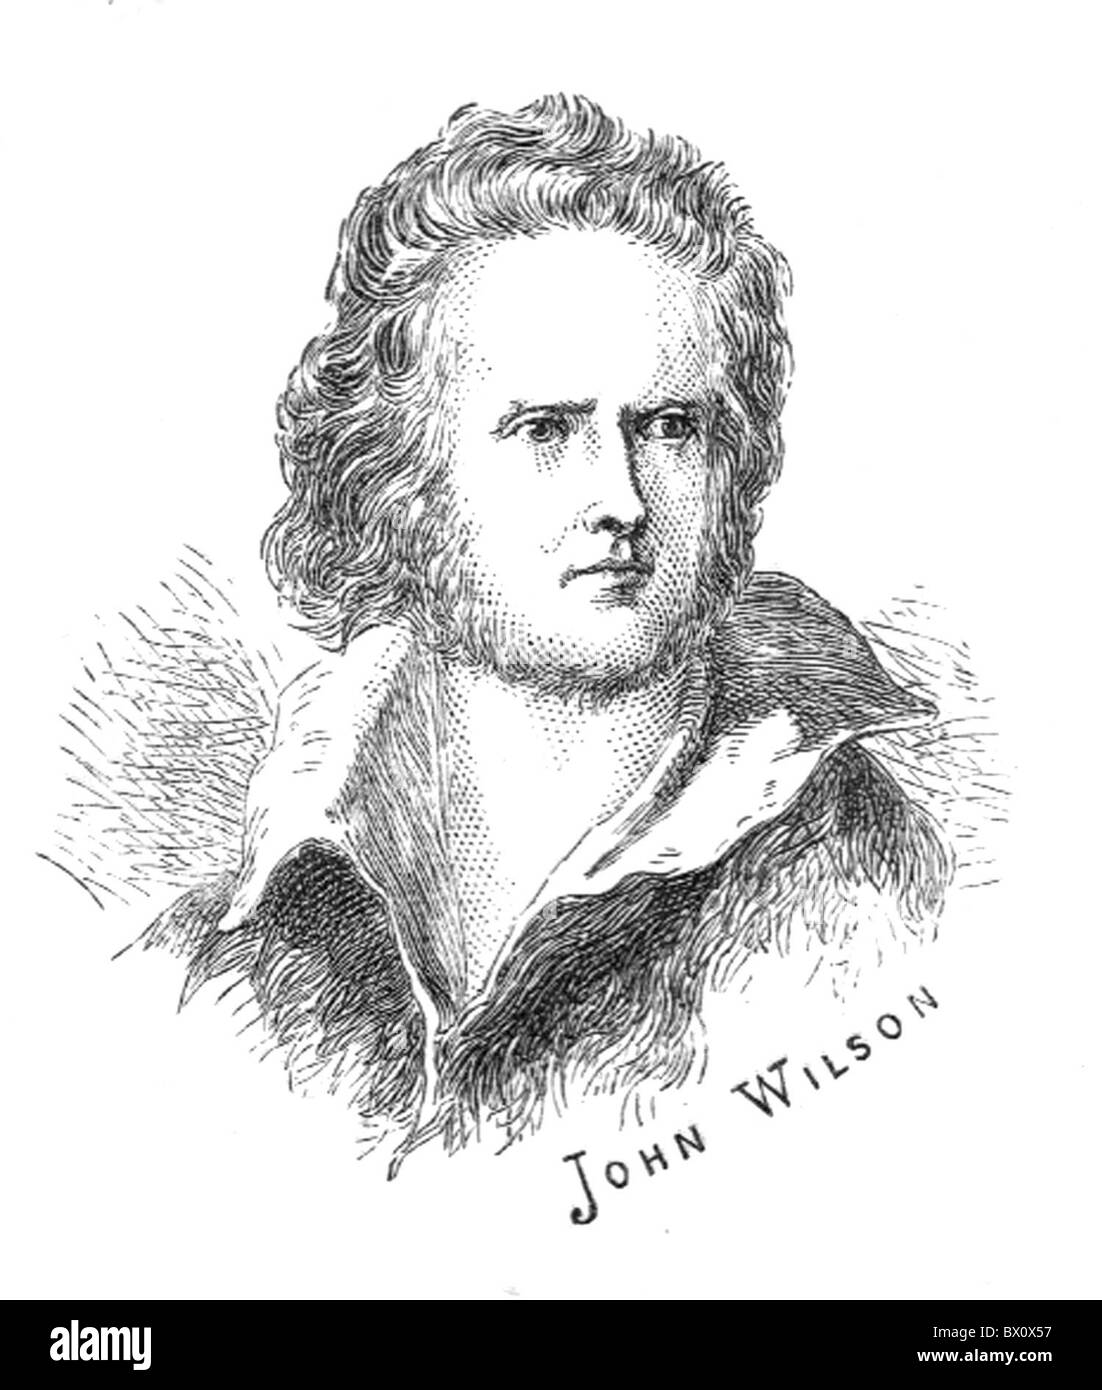 Archive image of historical literary figures. This is John Wilson. John Wilson of Elleray FRSE (18 May 1785 – 3 April 1854) was a Scottish advocate, literary critic and author, the writer most frequently identified with the pseudonym Christopher North of Blackwood's Edinburgh Magazine. He was professor of Moral Philosophy at Edinburgh University (1820–1851). From the archives of Press Portrait Service (formerly Press Portrait Bureau) Stock Photo